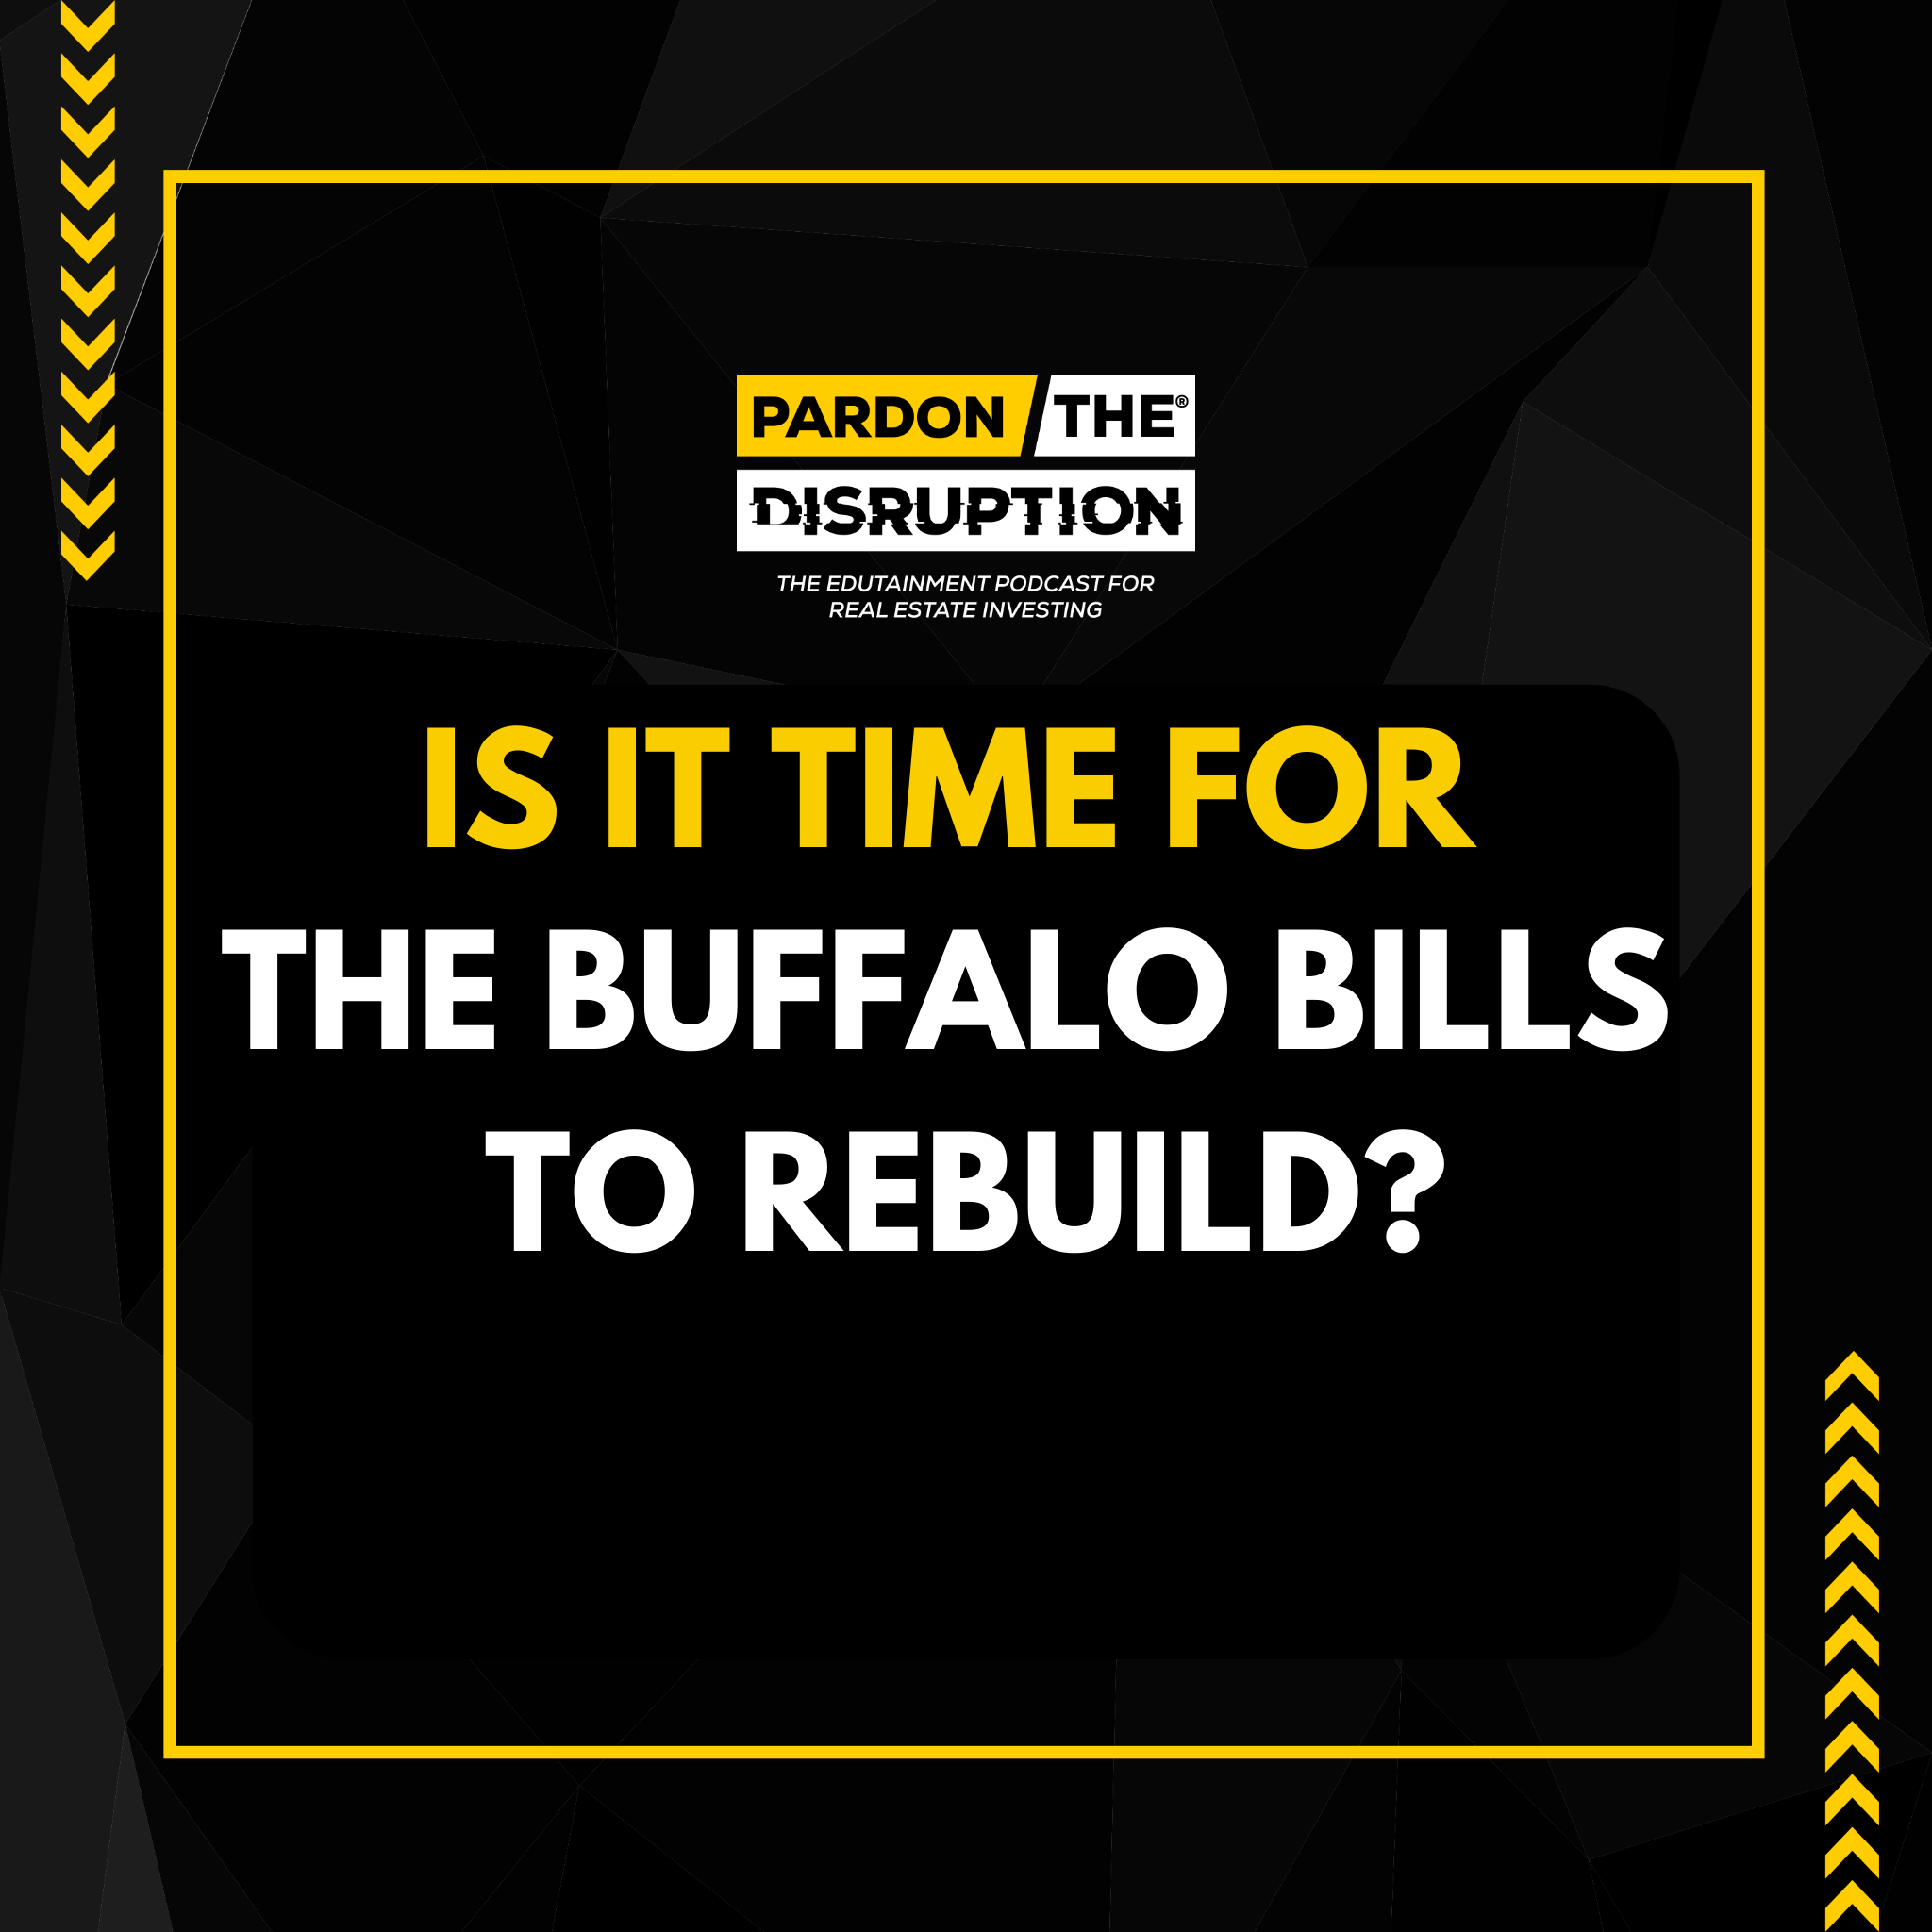 Is it Time for the Buffalo Bills to Rebuild?